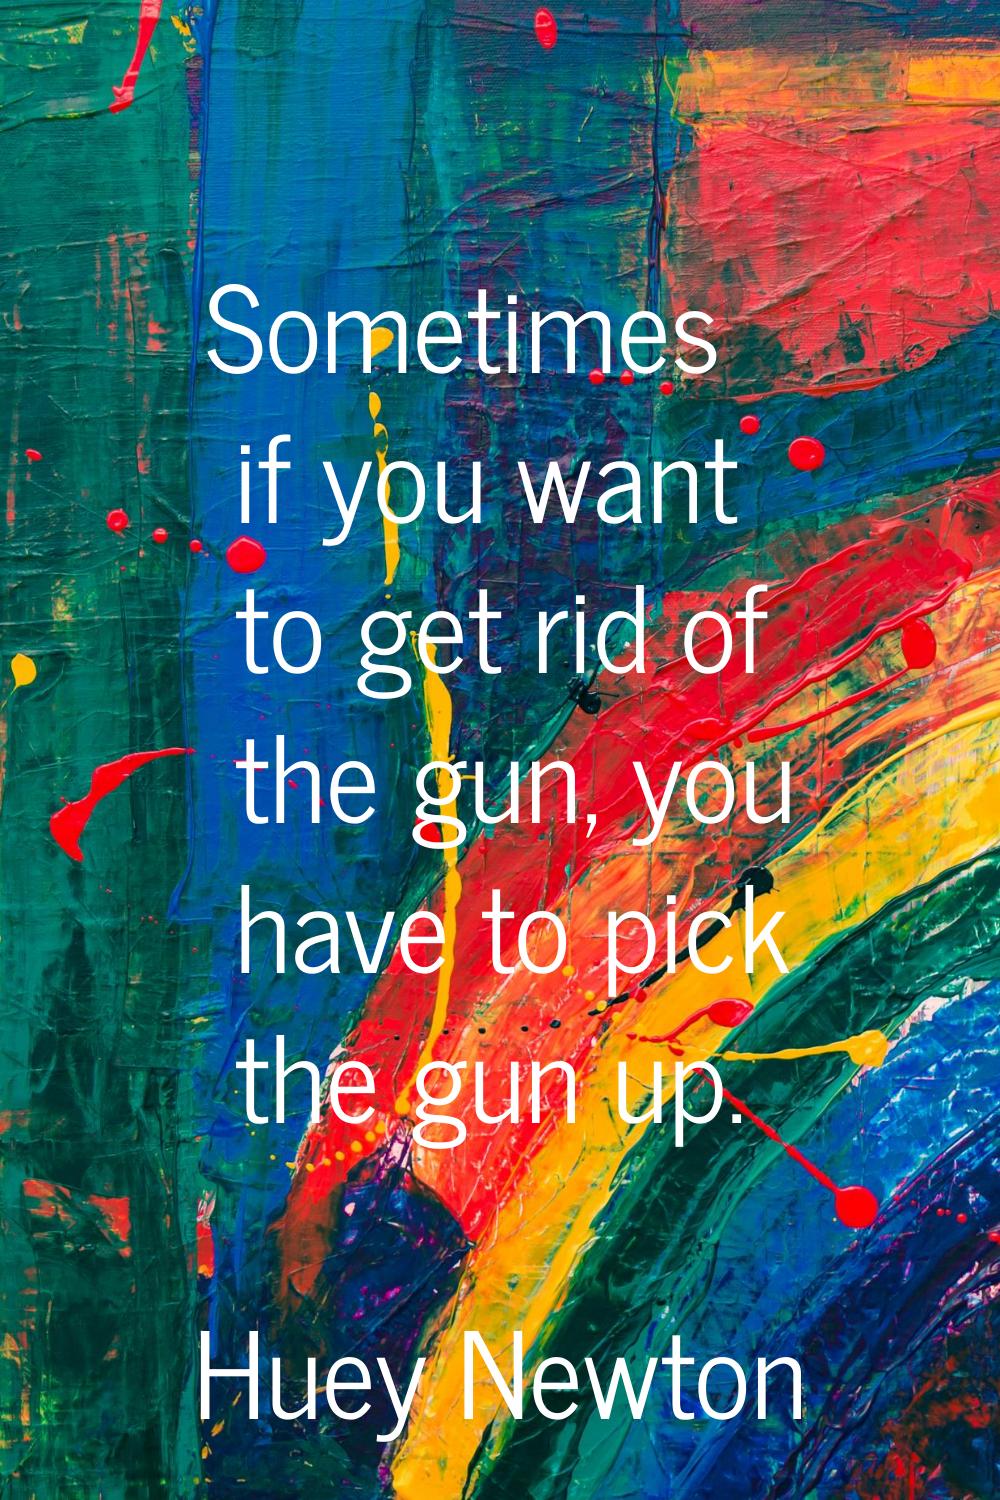 Sometimes if you want to get rid of the gun, you have to pick the gun up.